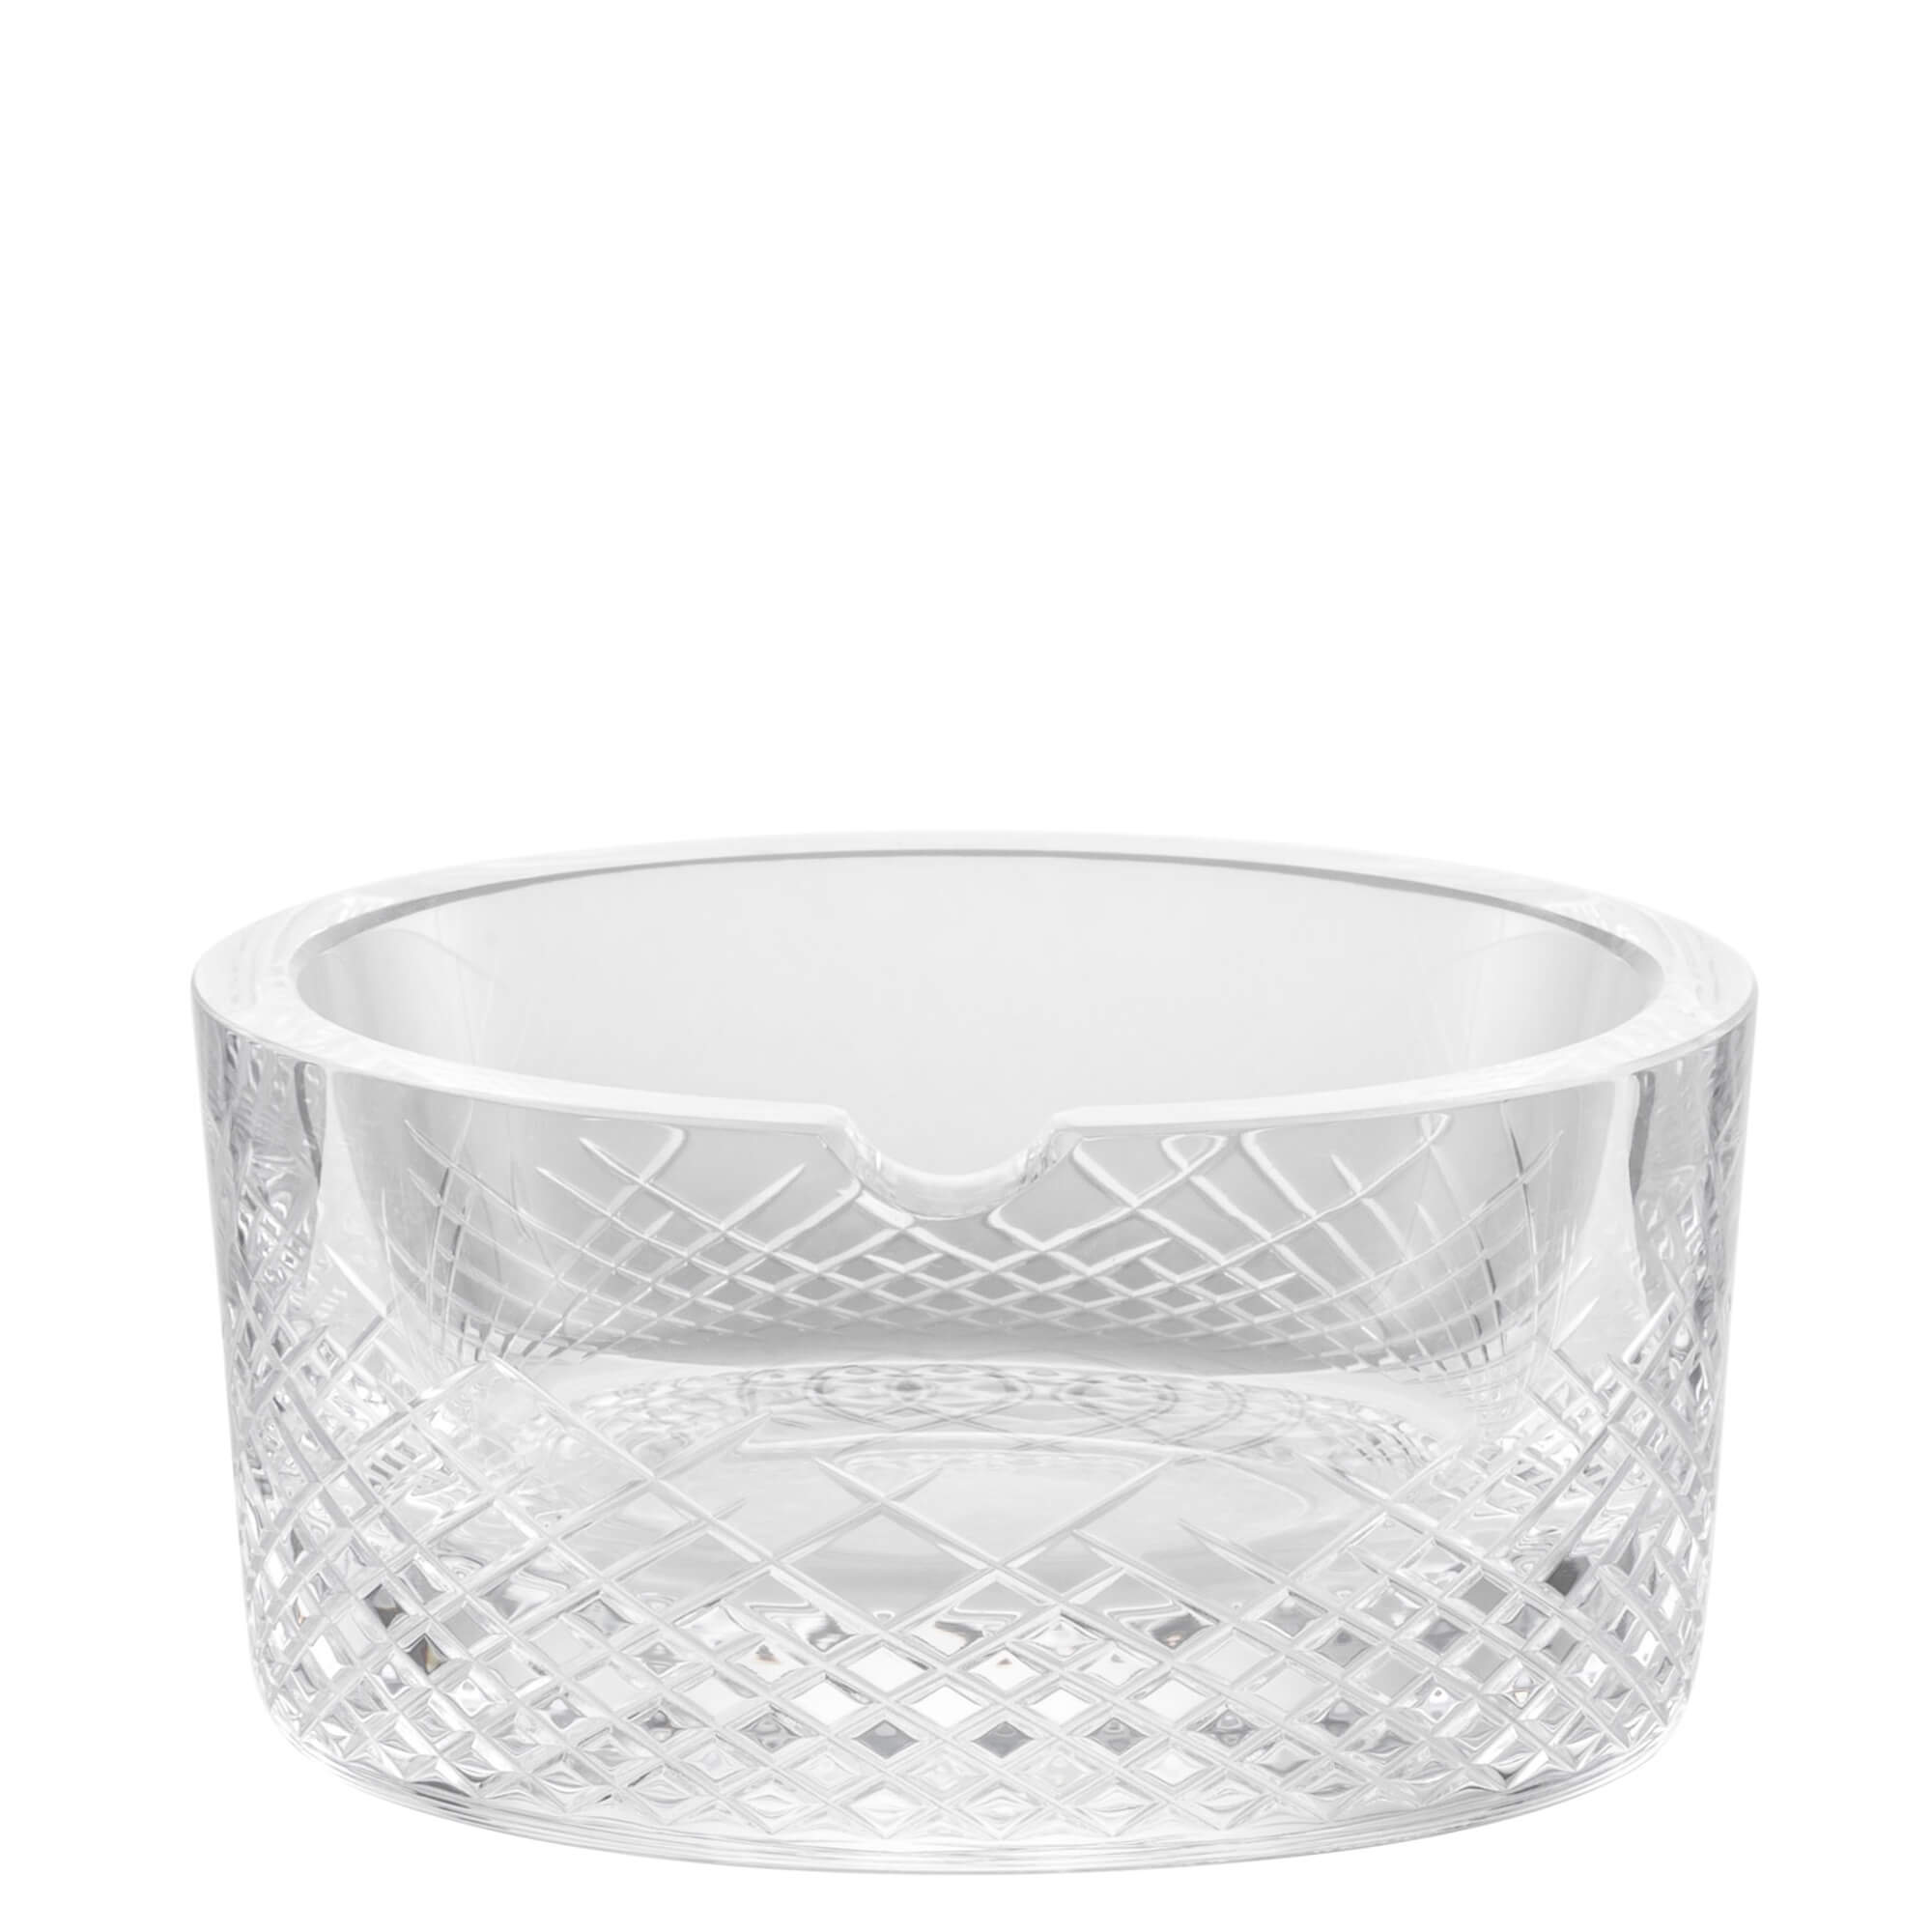 Ashtray Hommage Comète, Zwiesel Glas - 92mm (1 pc.)